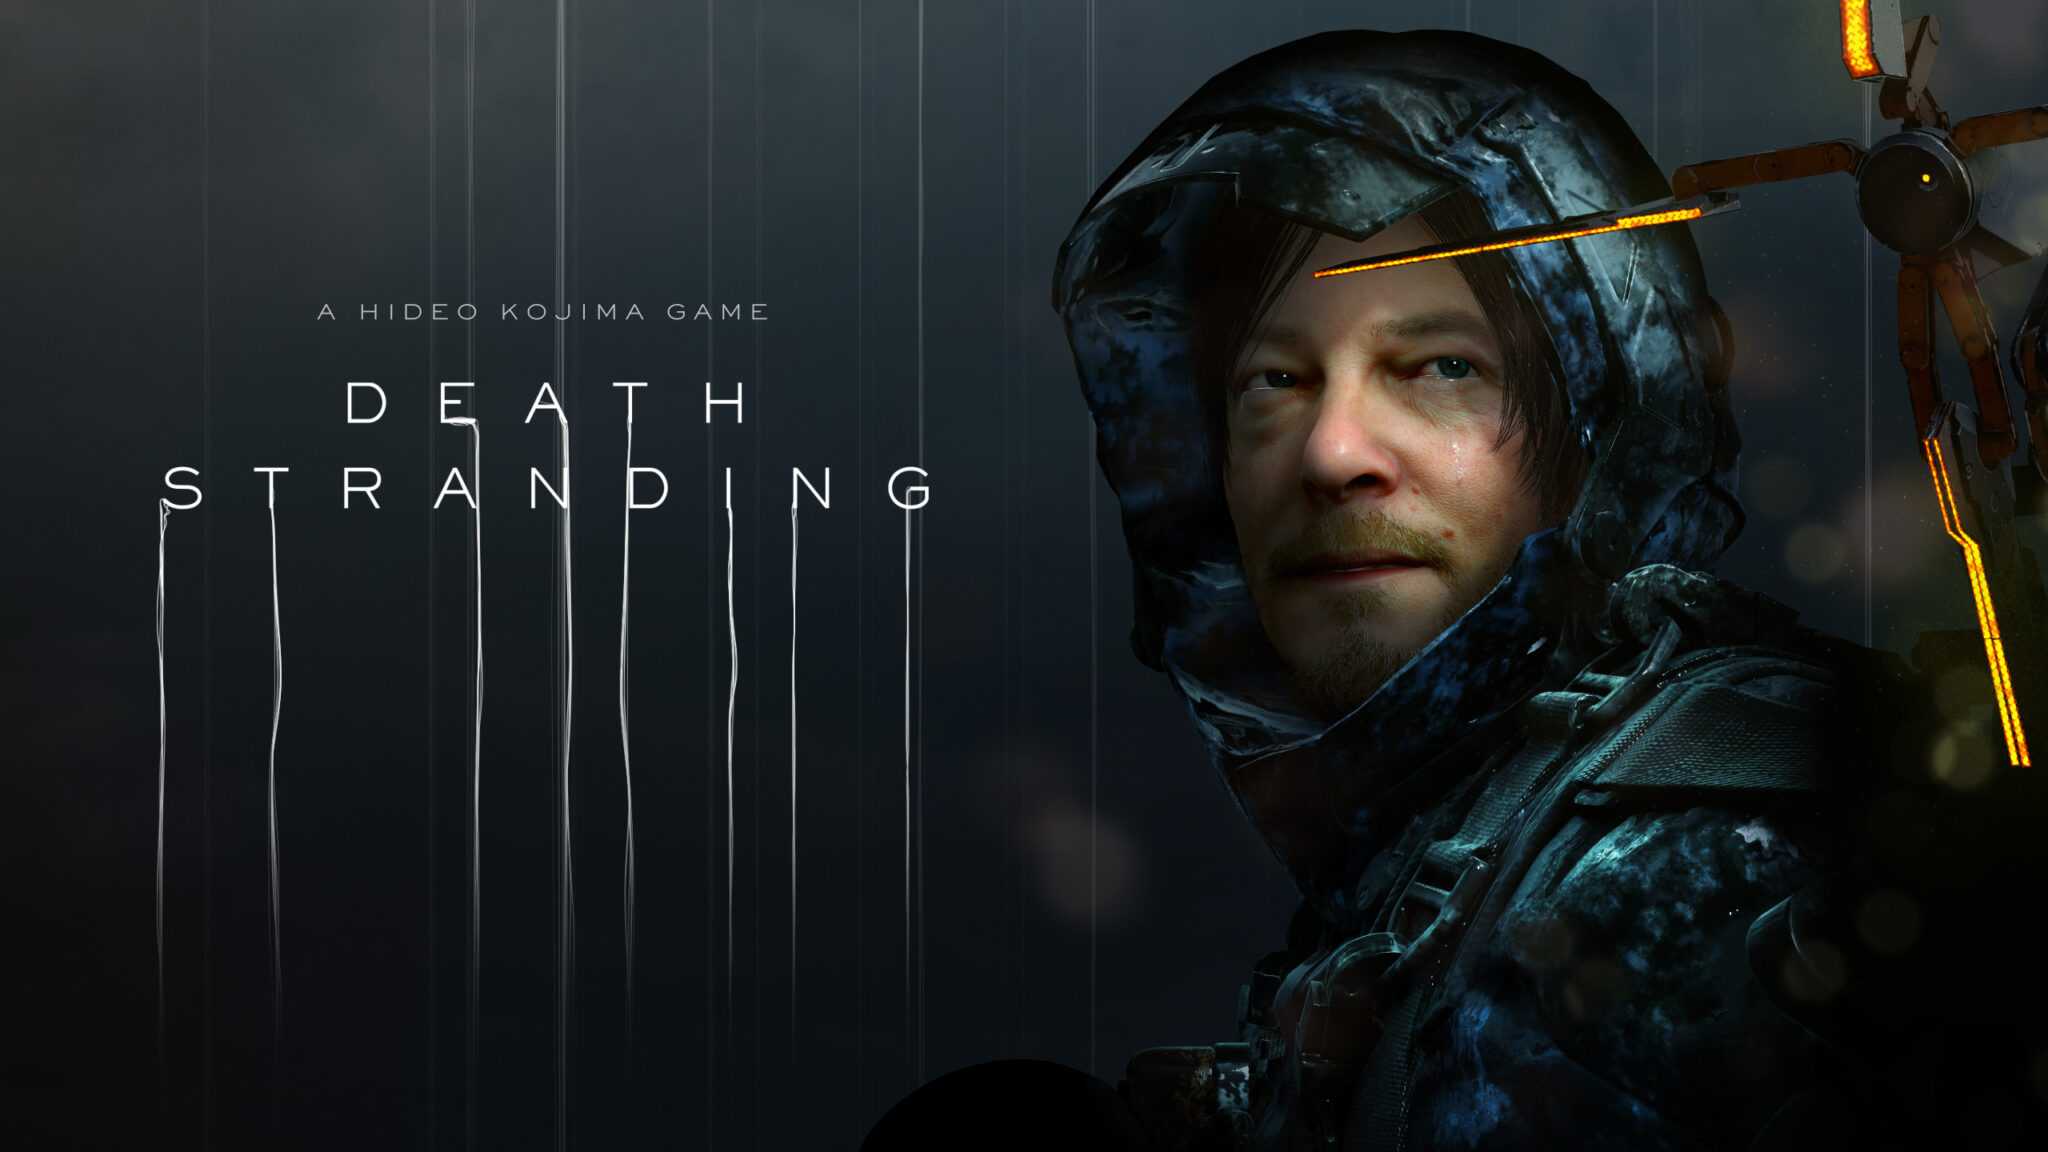 Death Stranding - DS wide 2560x1440 c3d7bbf8ee36dd025610088381a5235a scaled - ภาพที่ 1